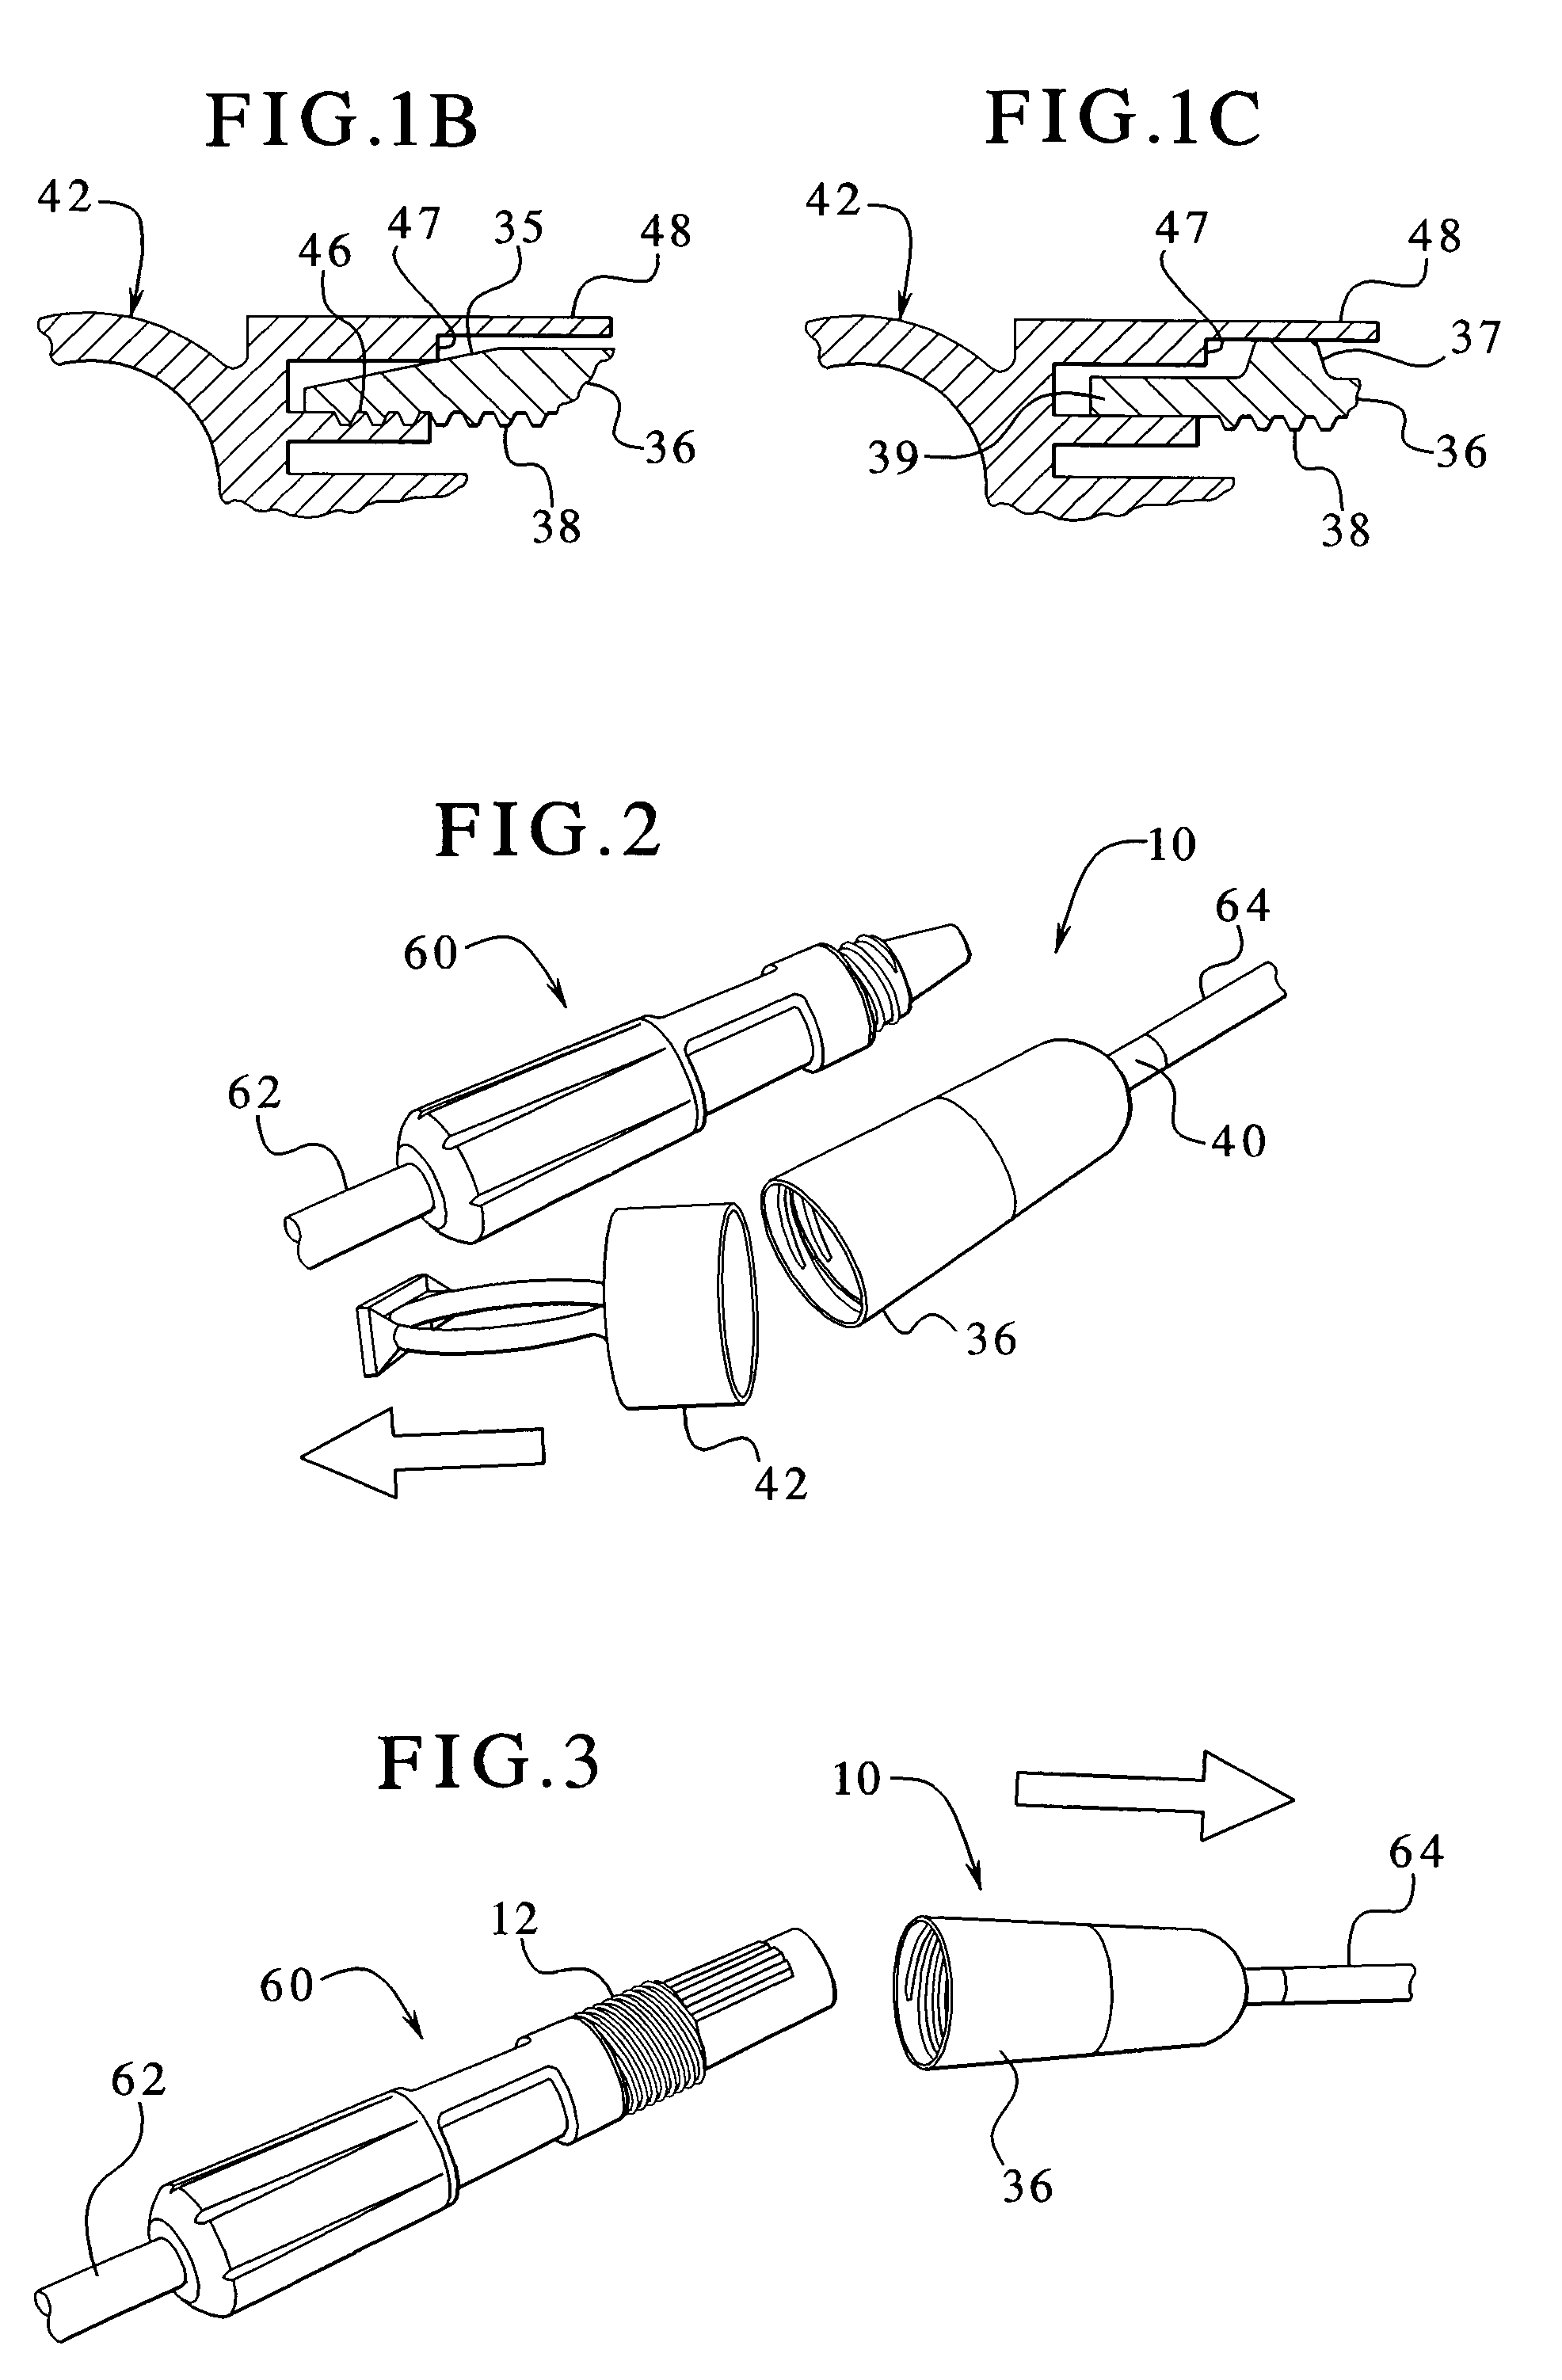 Dialysis connector with retention and feedback features